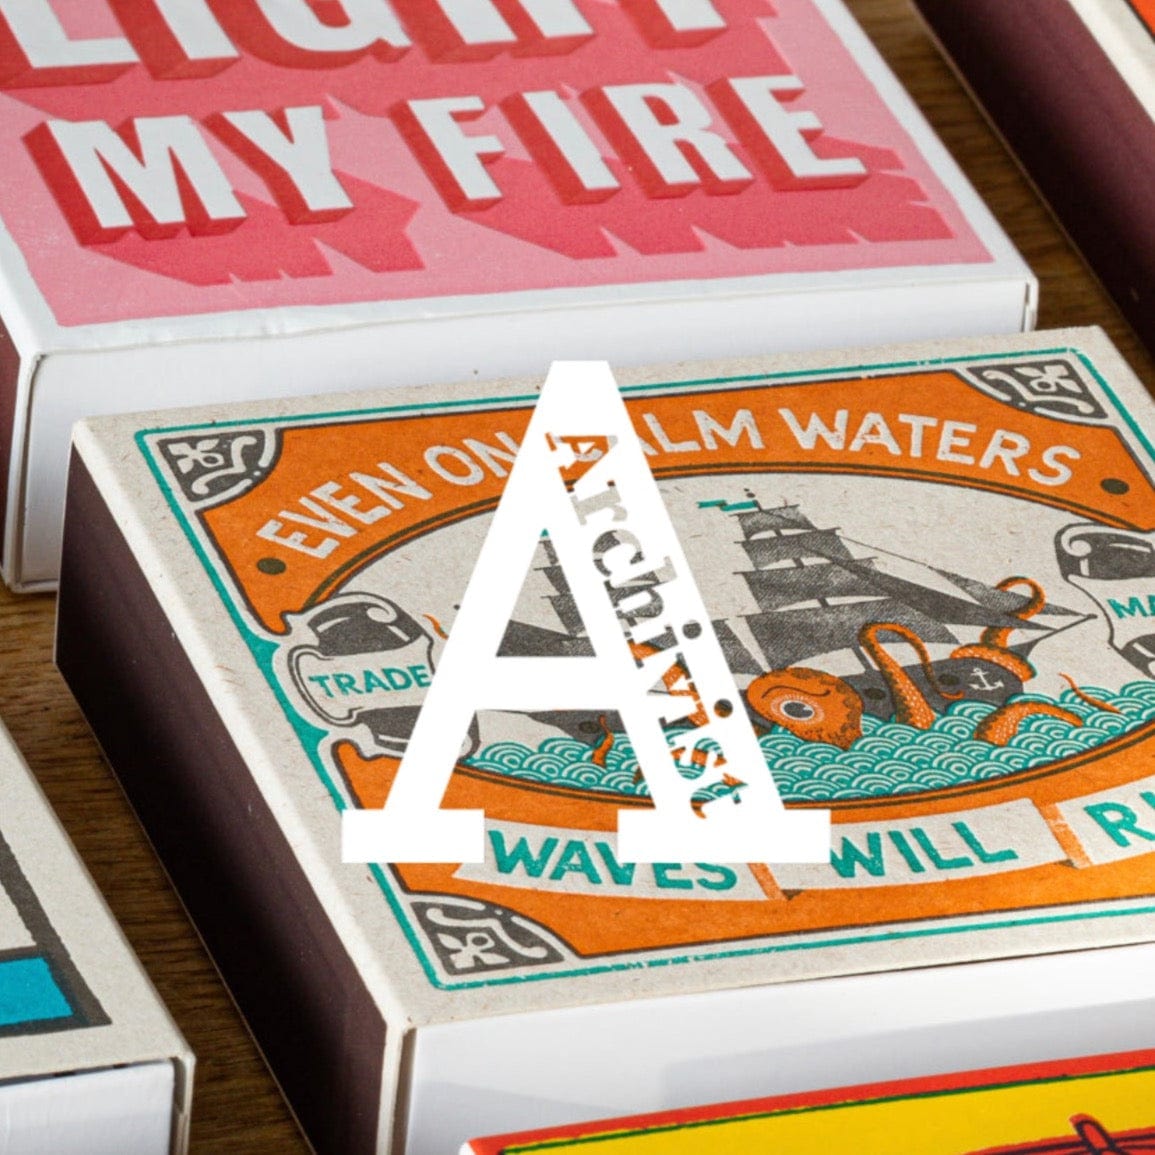 Ariane's Circus Show Matchbox by Archivist Gallery